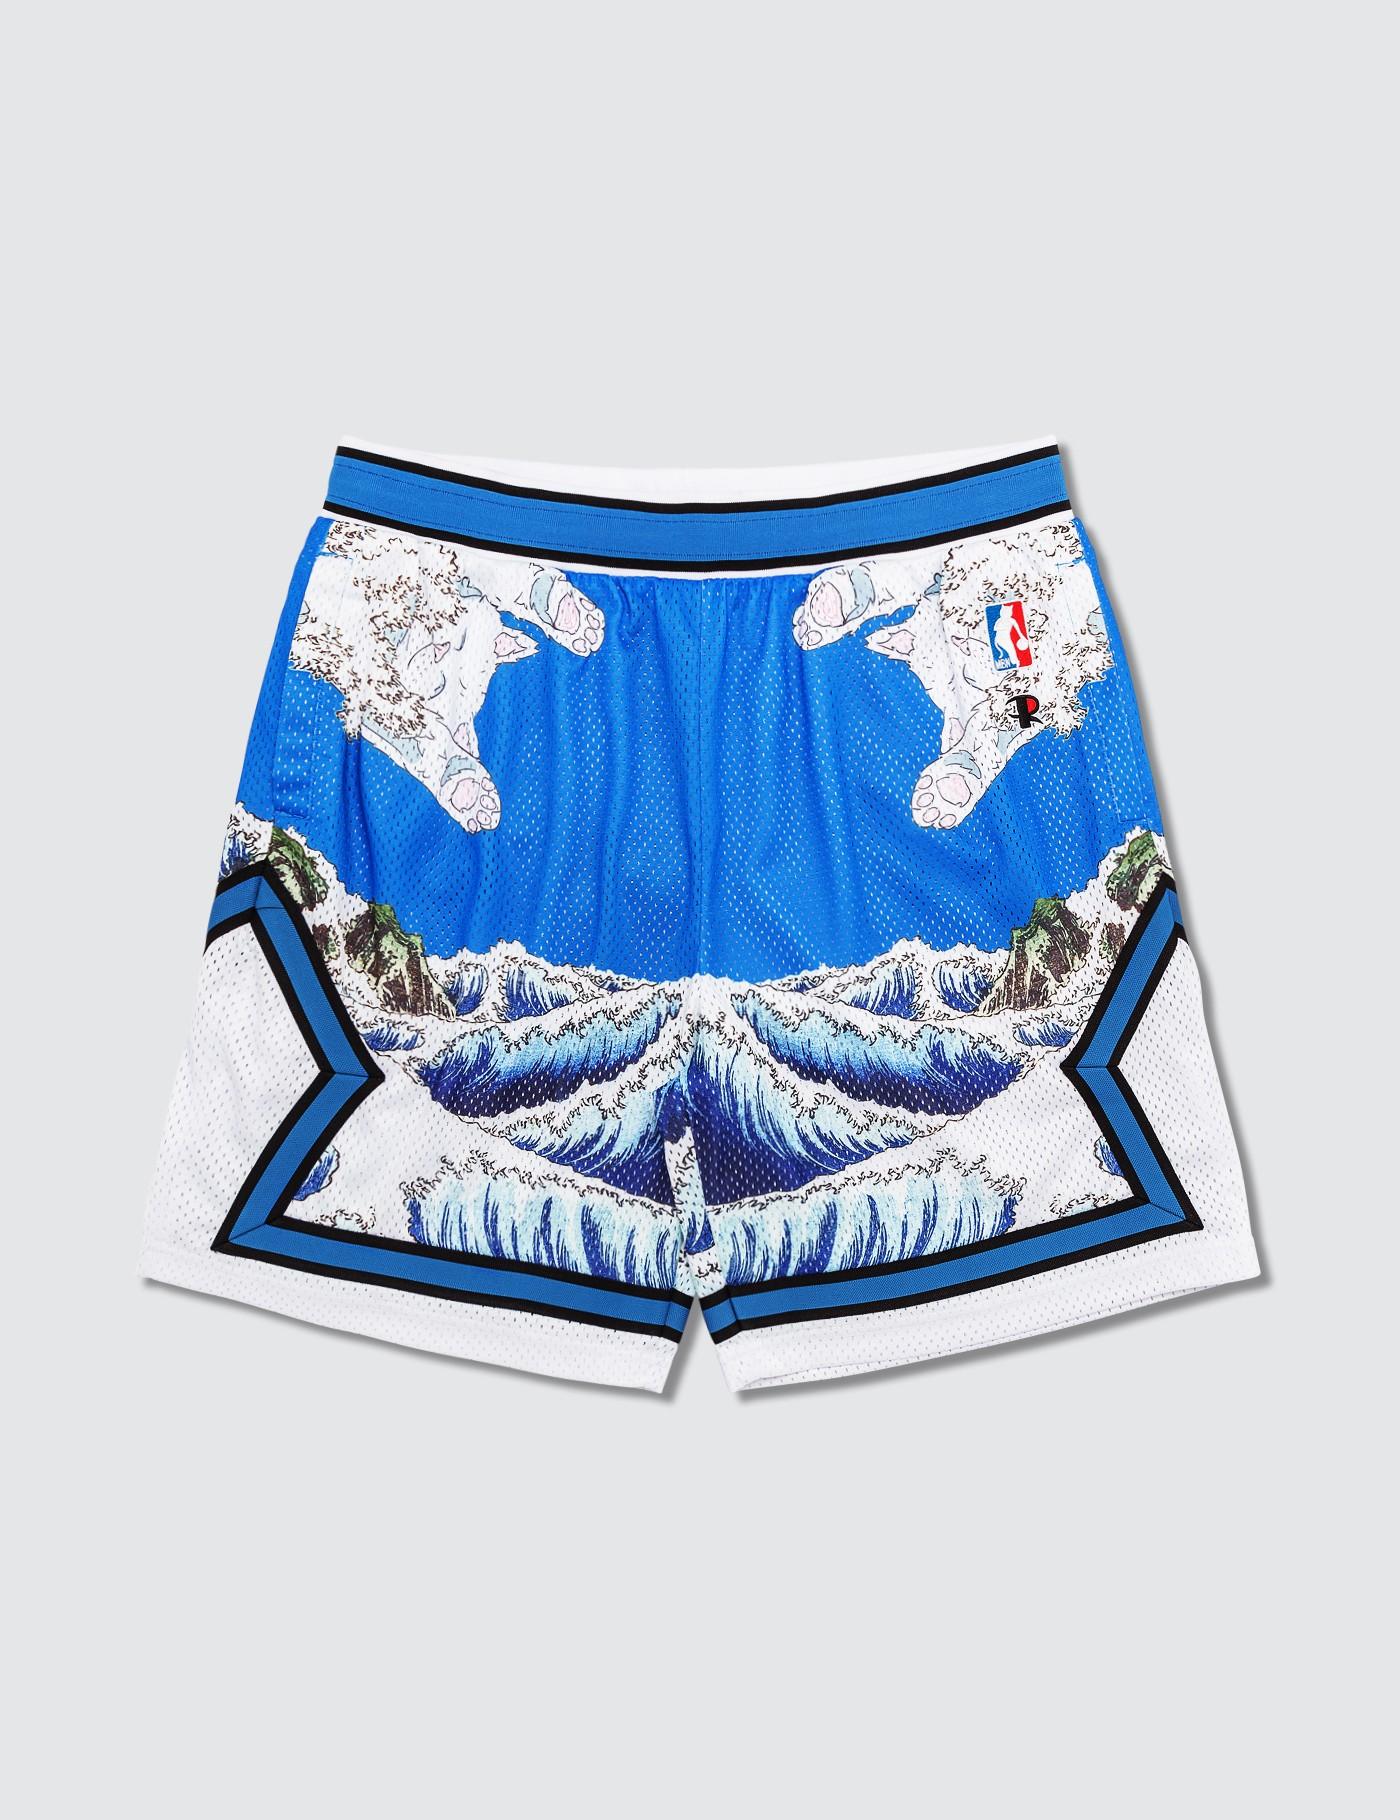 RIPNDIP Synthetic Great Wave Mesh Basketball Shorts in Blue for Men - Lyst